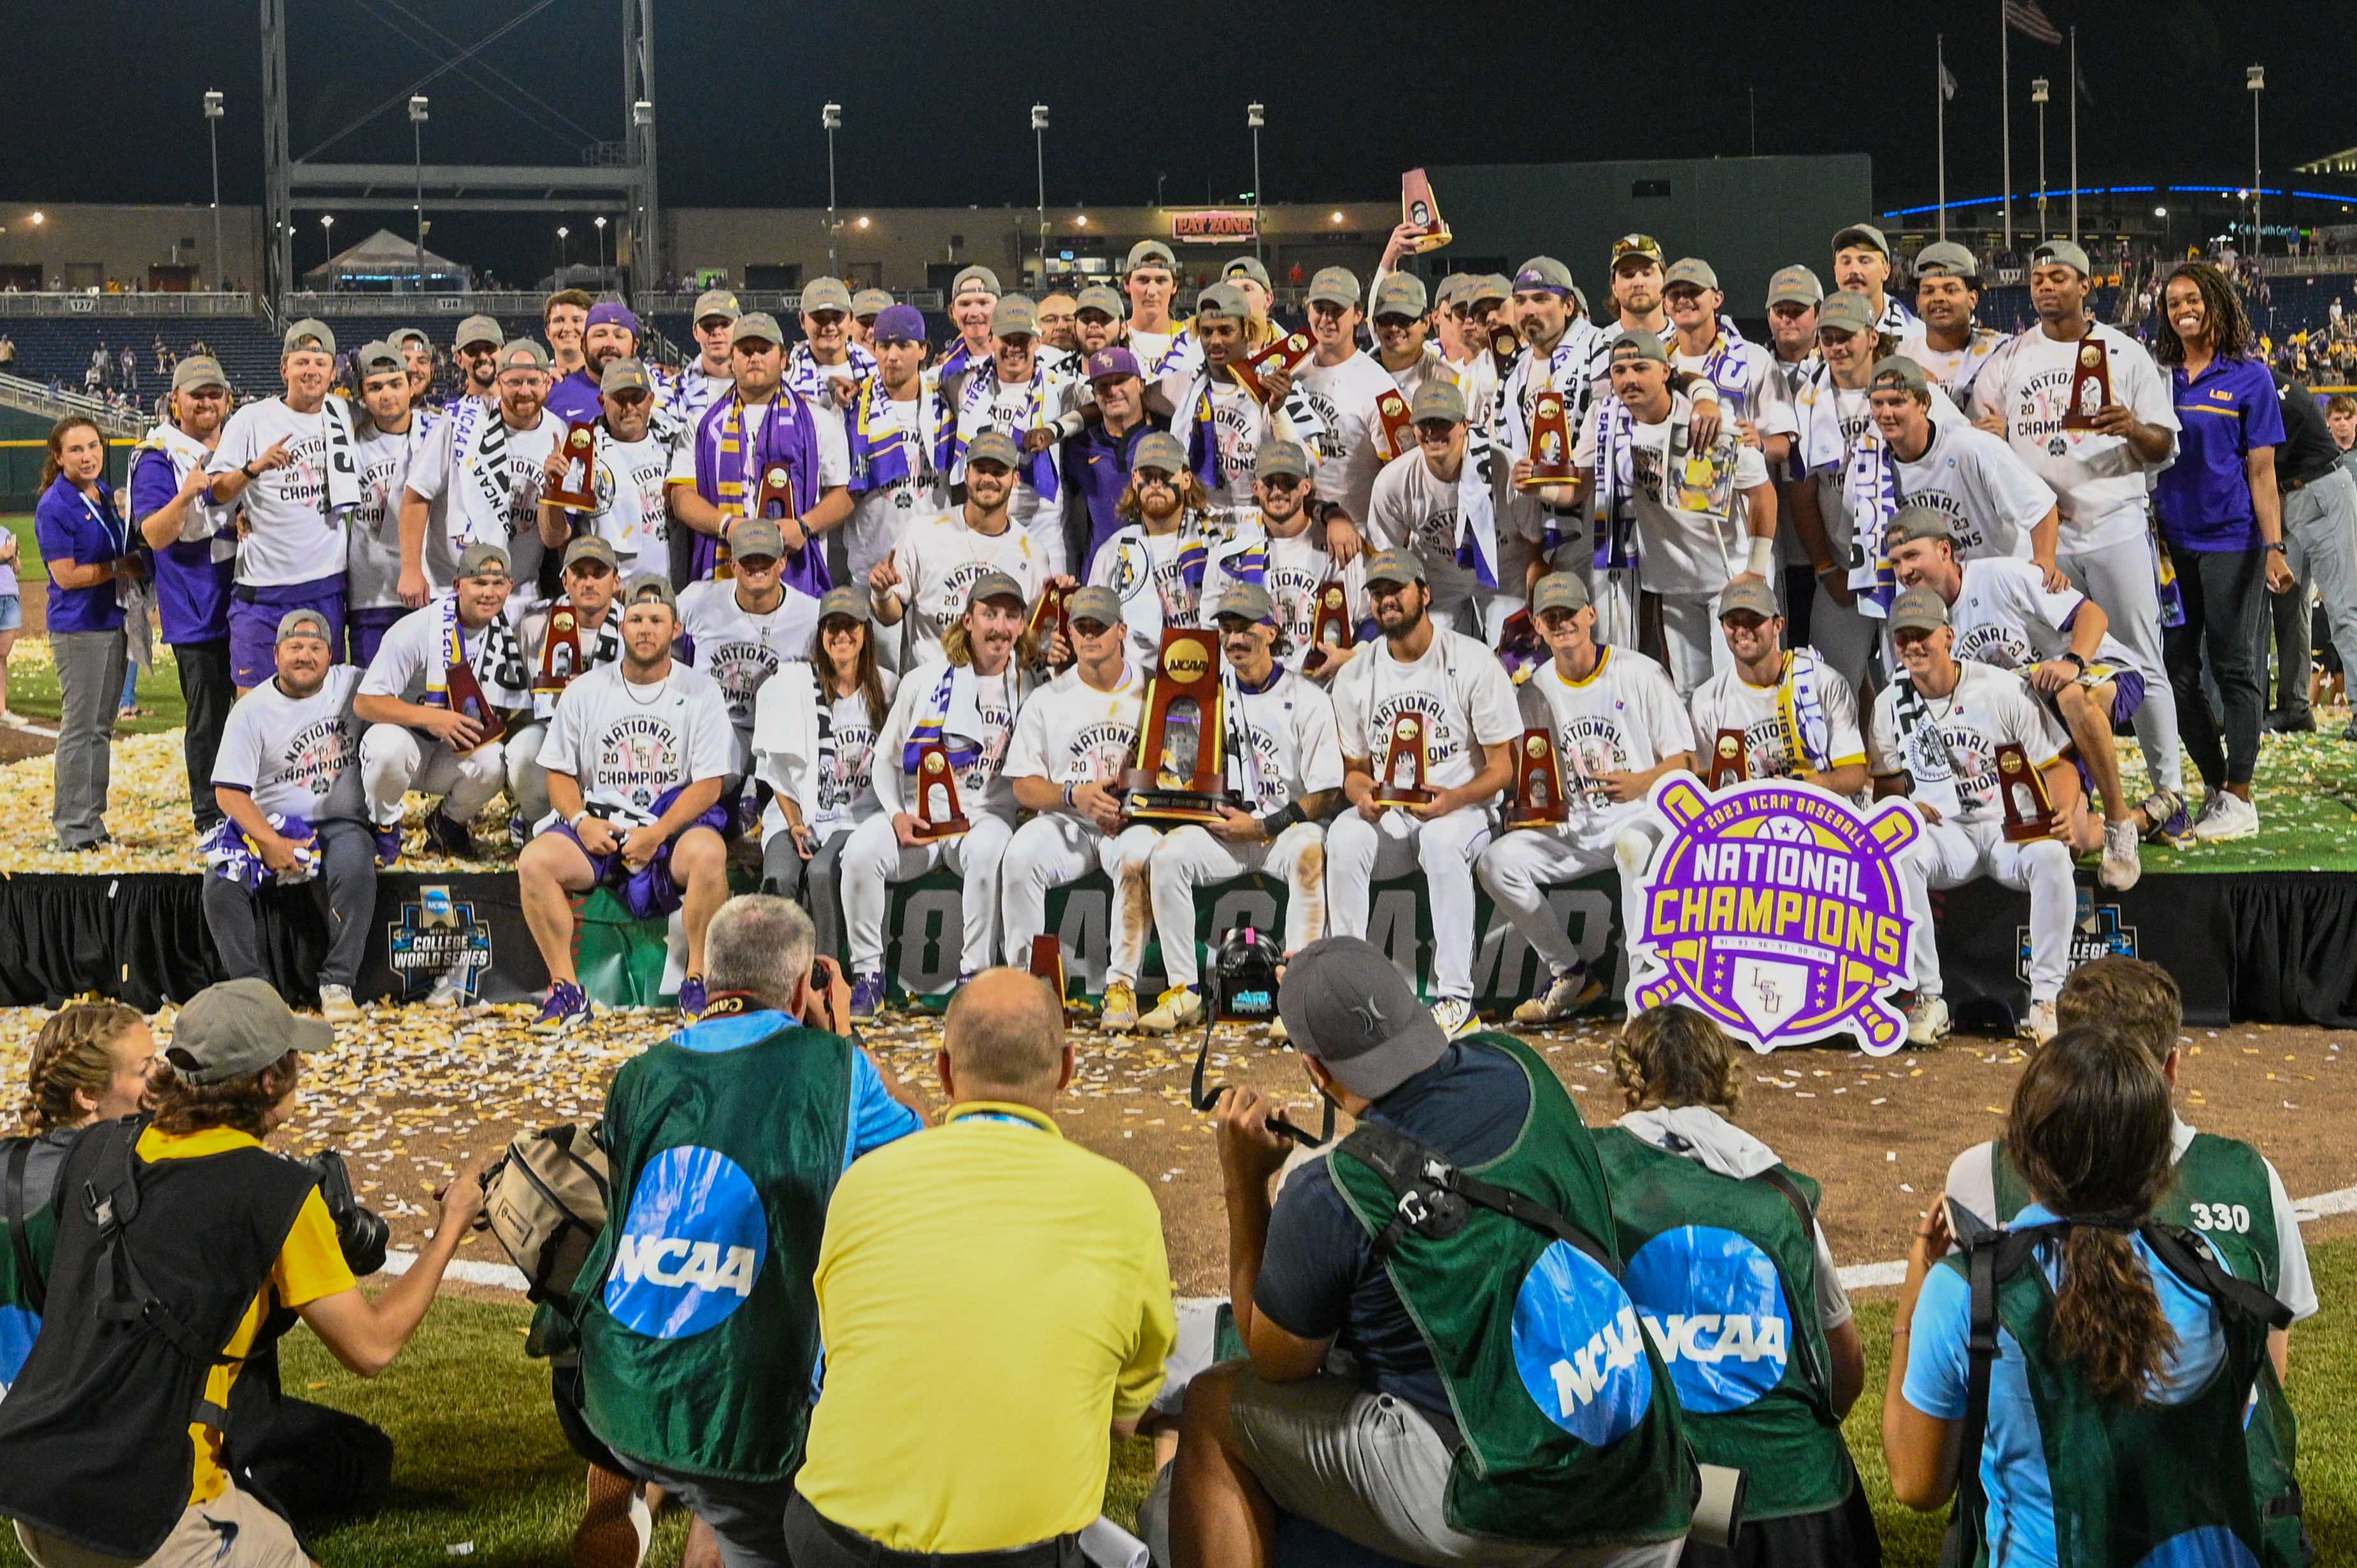 Last year, LSU won the NCAA Tournament with a finals victory over Florida in the College World Series in Omaha, Nebraska.